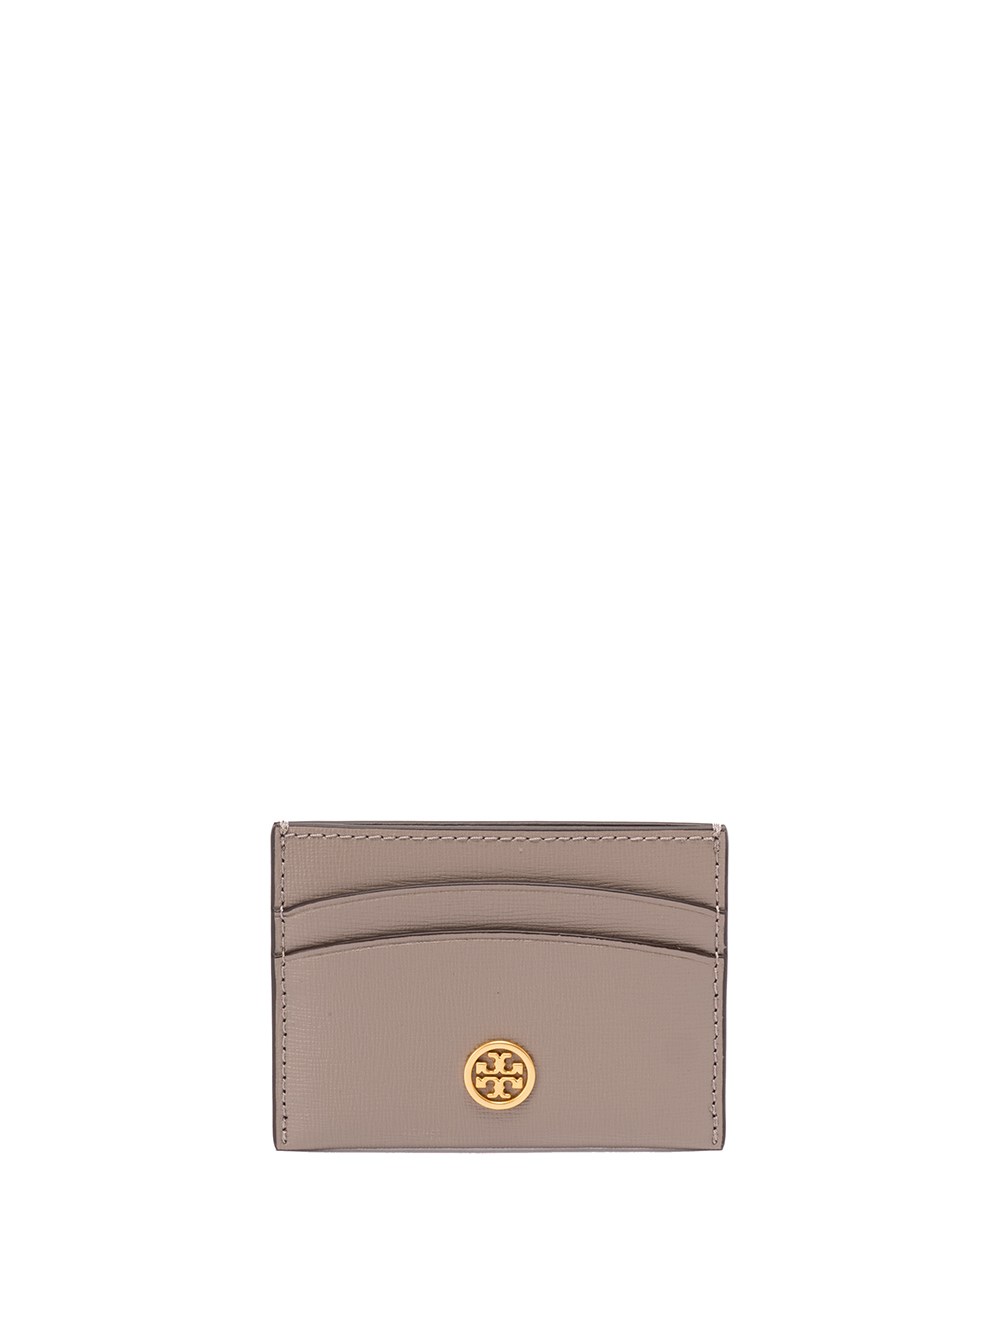 TORY BURCH `ROBINSON` LEATHER CARD CASE